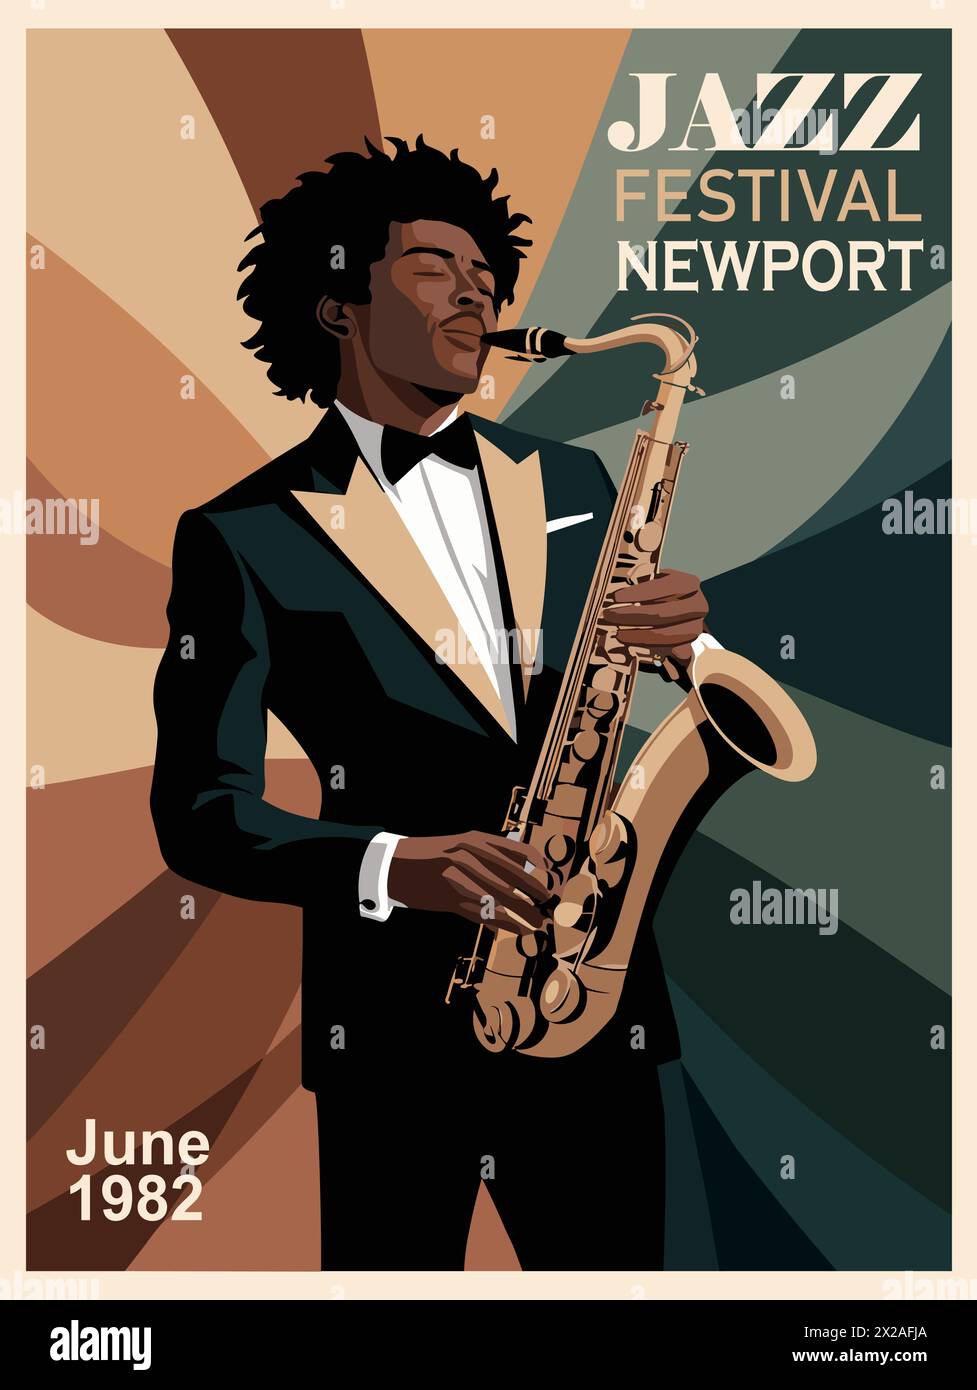 Jazz festival in Newport, June 1982 vintage style poster. African american man in a tuxedo suit playing a saxophone. The poster is colorful and has a Stock Vector